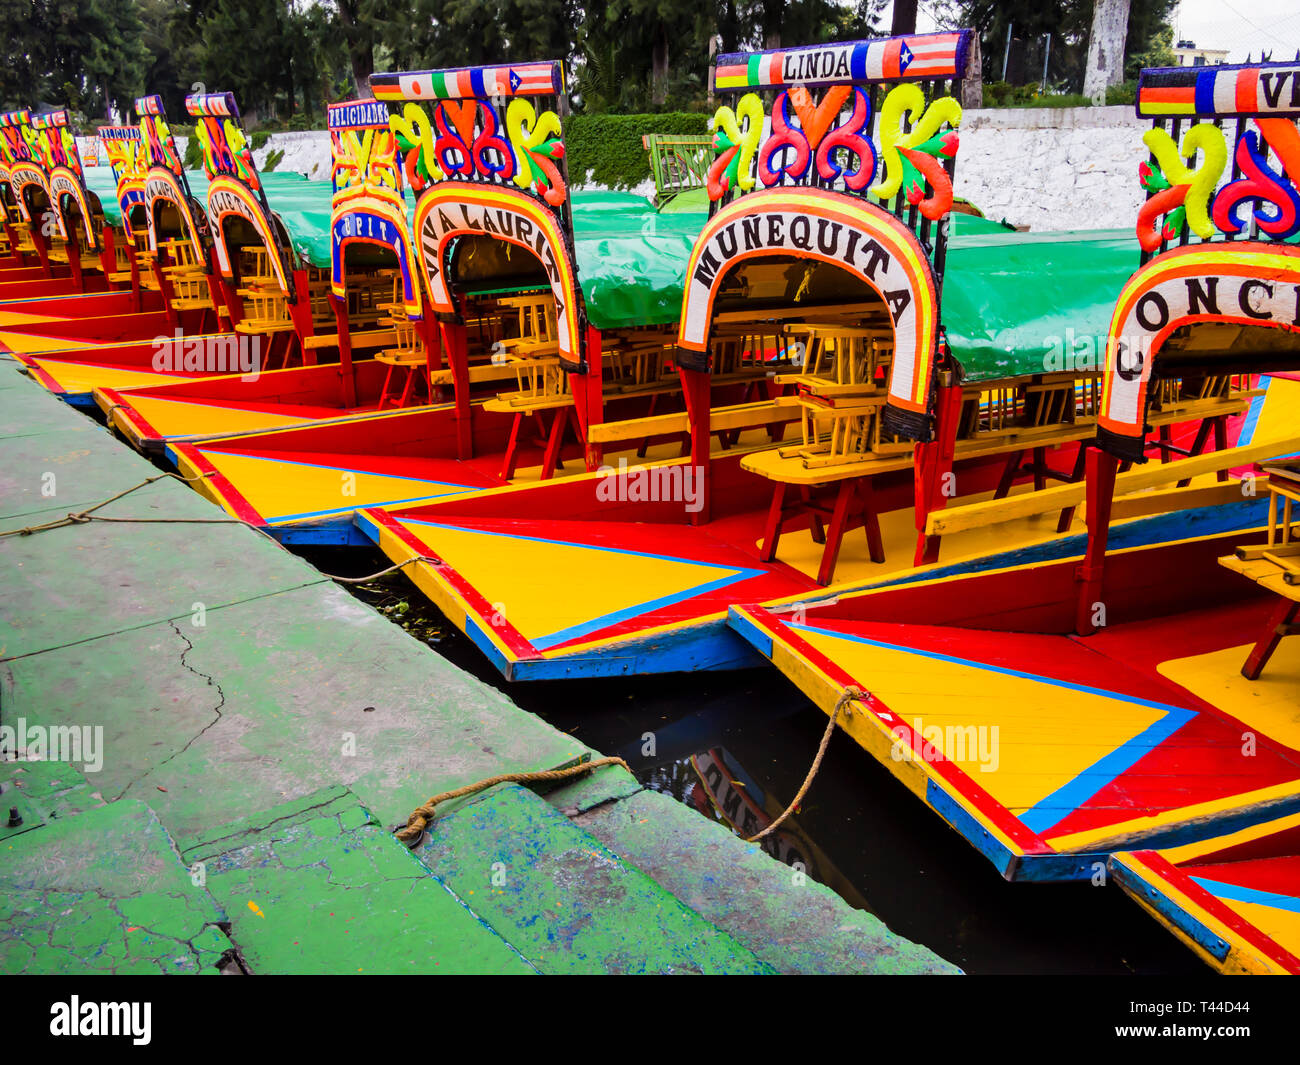 Row of traditional, colorful boats in Xochimilco, Mexico City Stock Photo